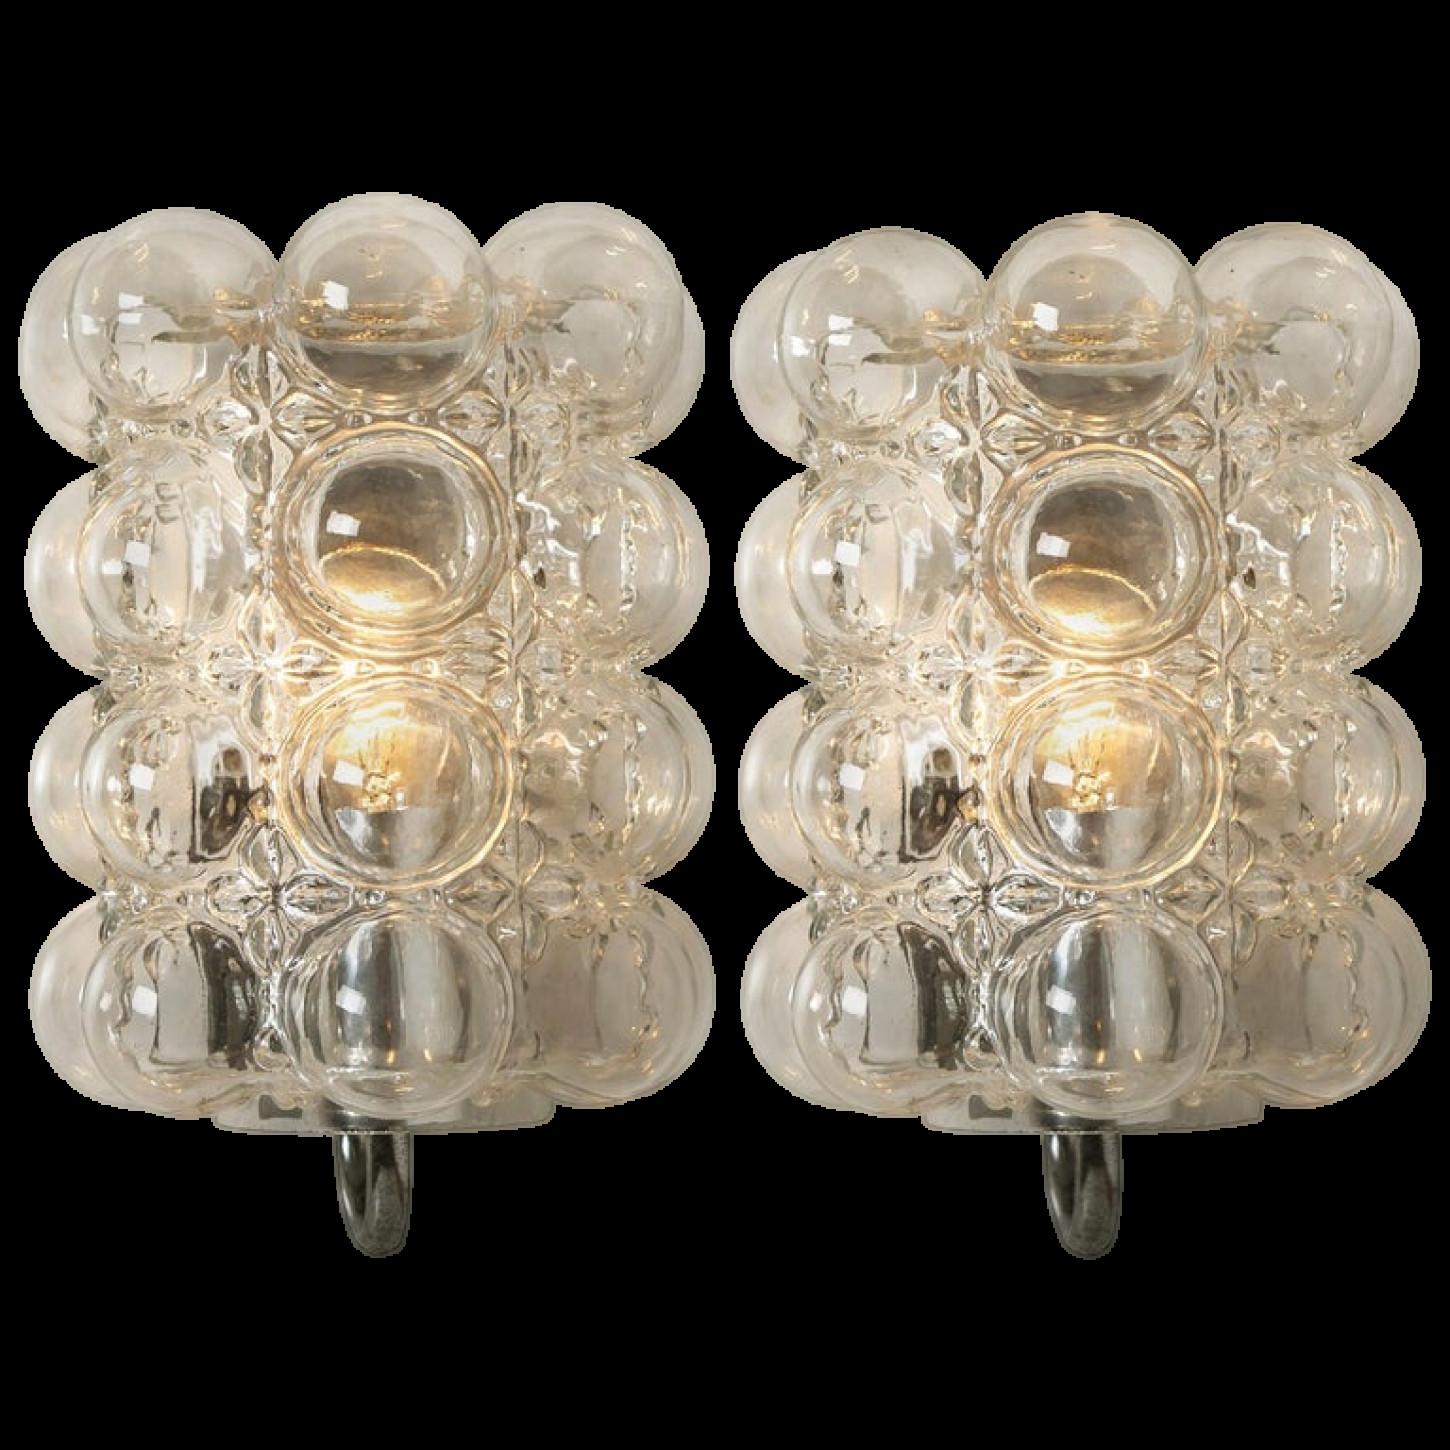 A pair of beautiful bubble glass wall lights designed by Helena Tynell for Glashütte Limburg. A design Classic, the clear colored or toned of the hand blown glass gives a wonderful and warm glow.xa0

Helena Tynell is a Finnish glass and ceramics